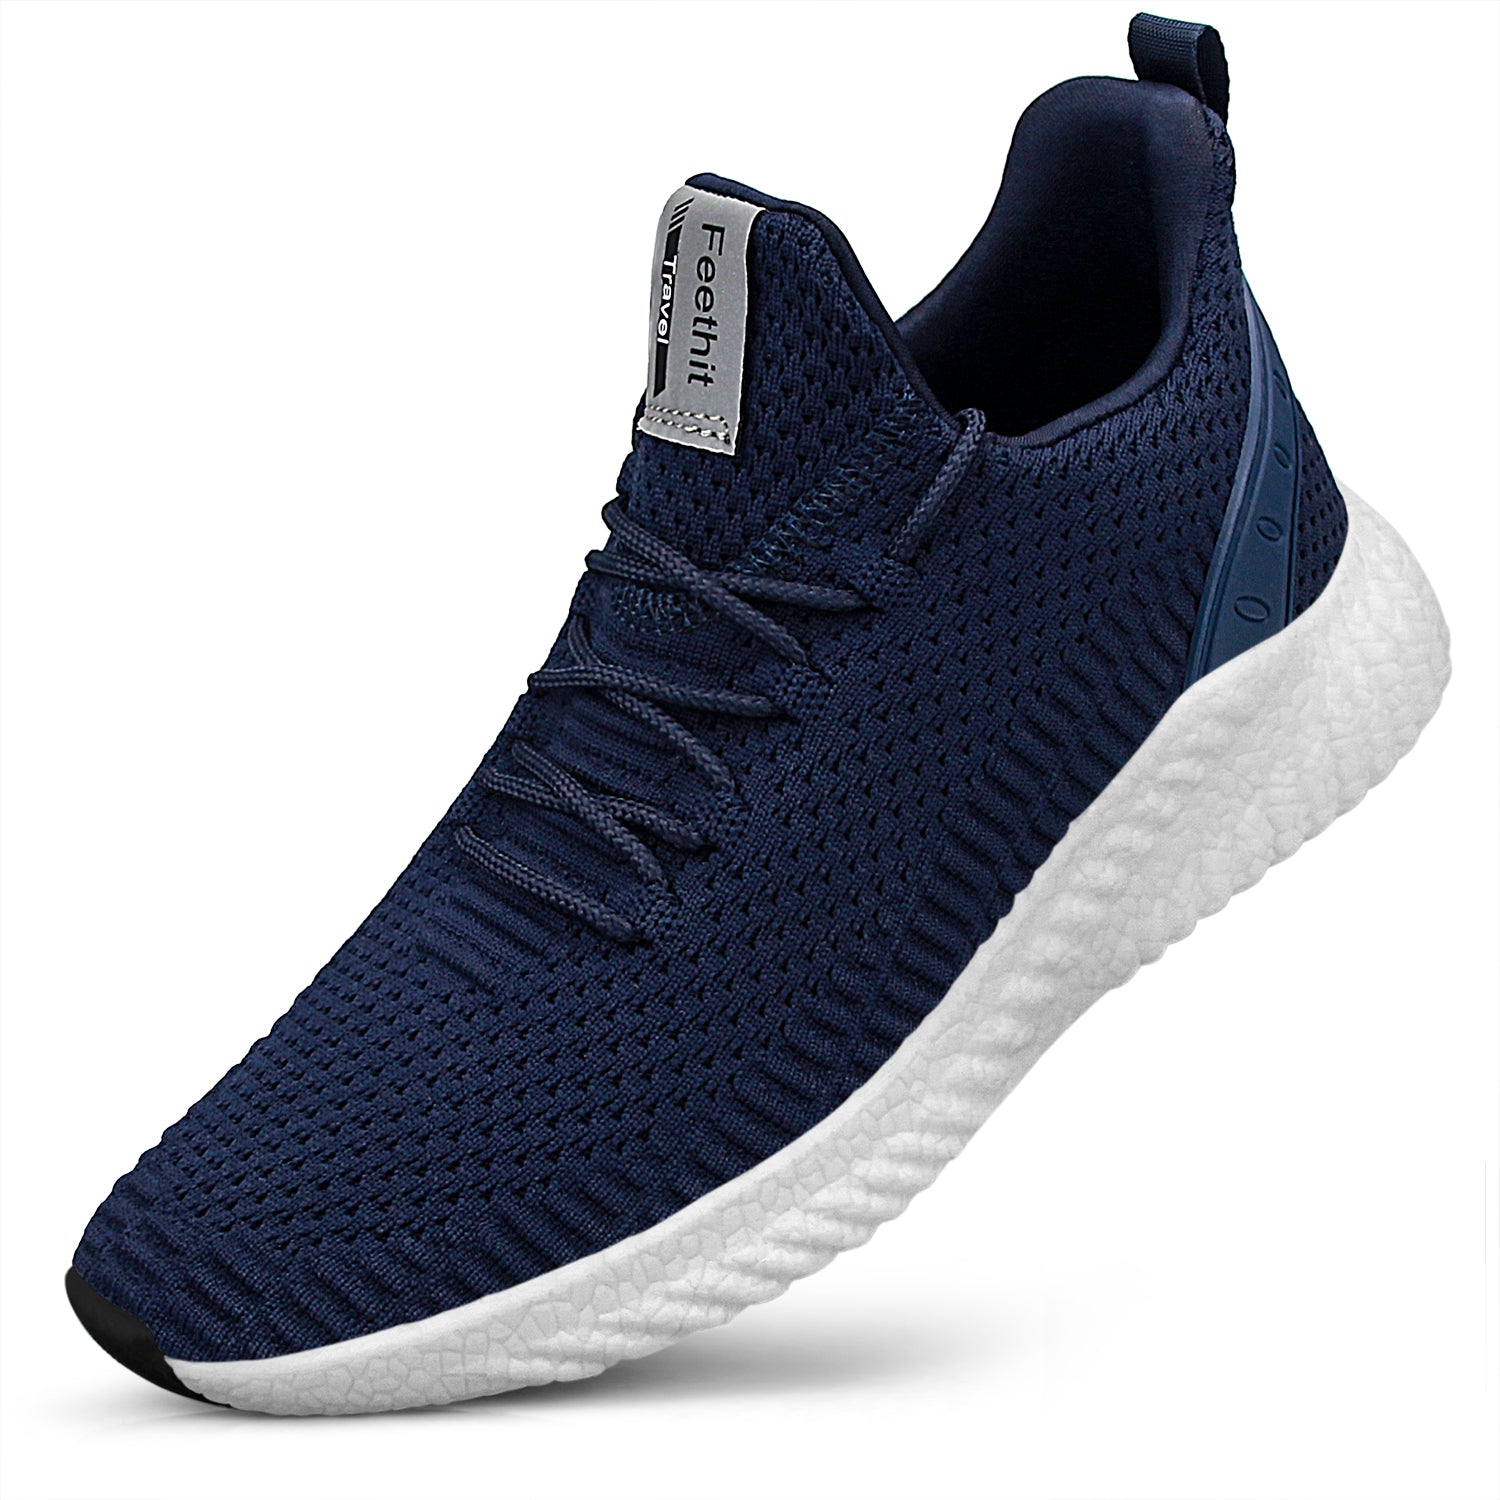 FEETHIT Running Shoes Online Store